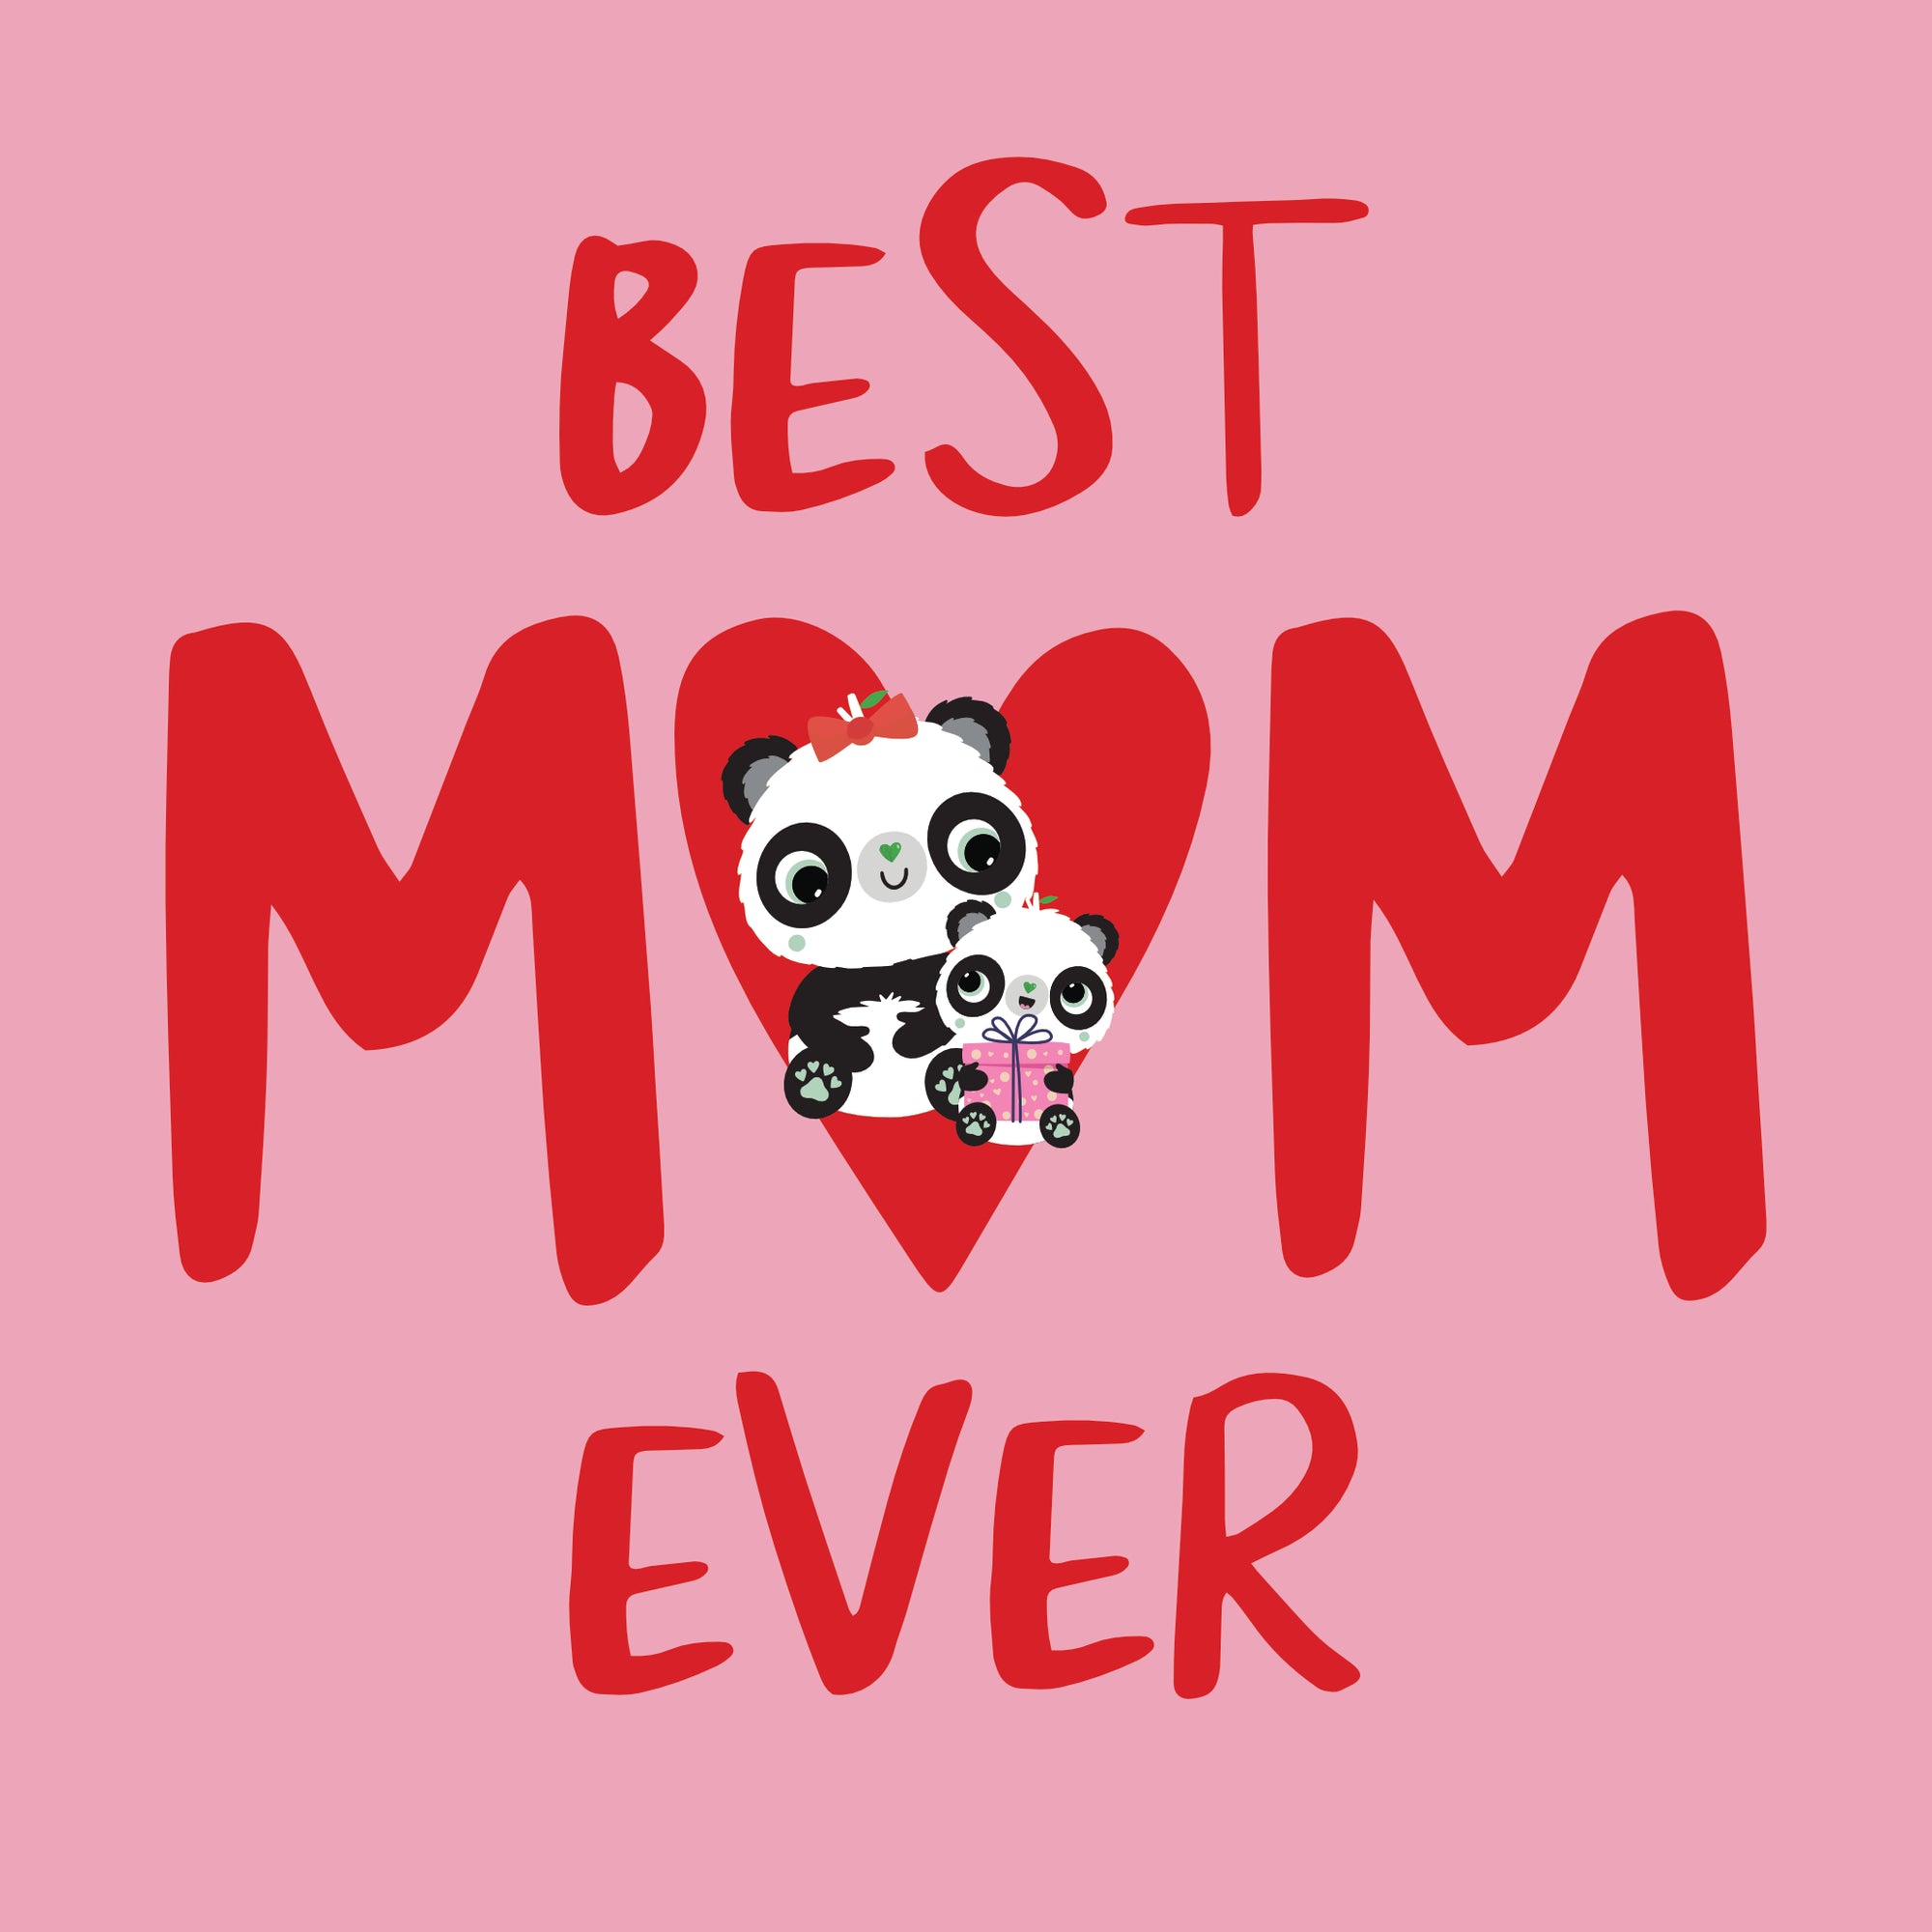 Best MUM Ever! | Square Eco Friendly Mother's Day Cards | Panda Joy